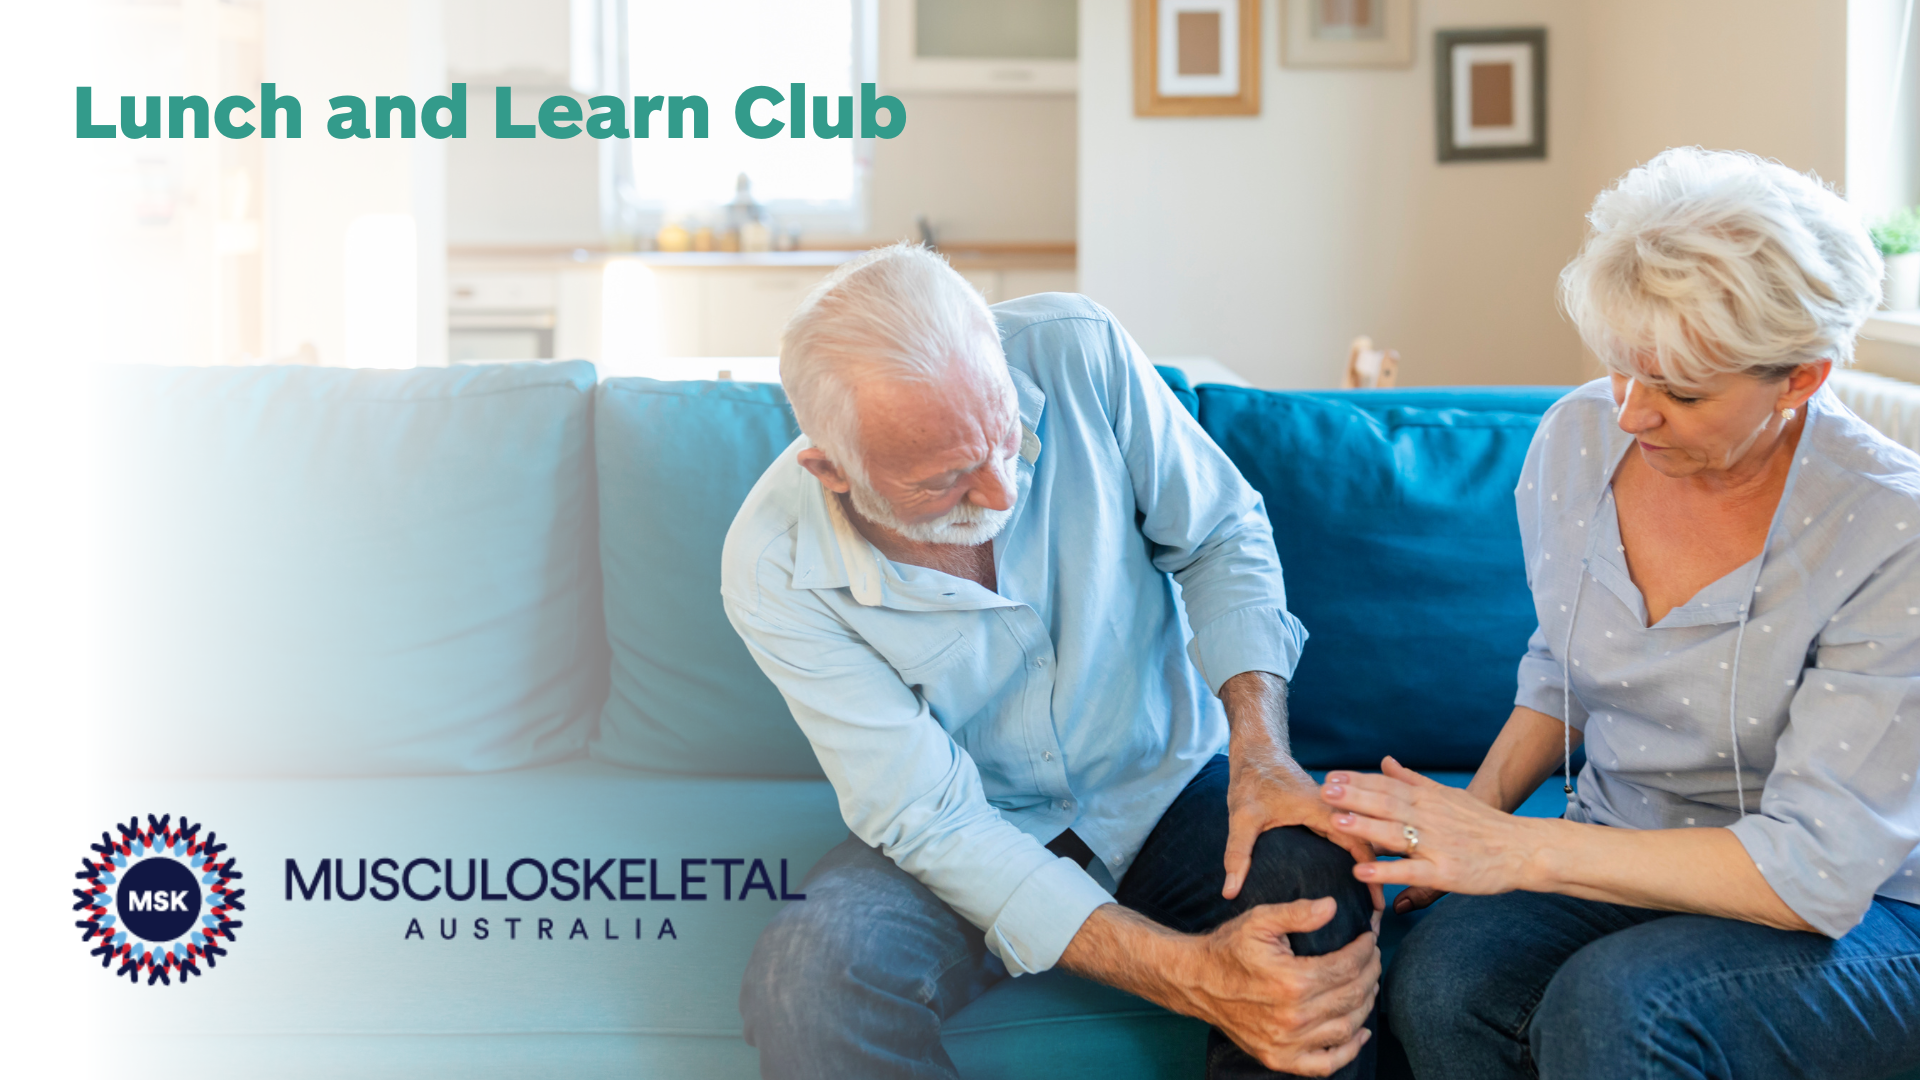 Lunch and Learn Musculoskeletal Australia